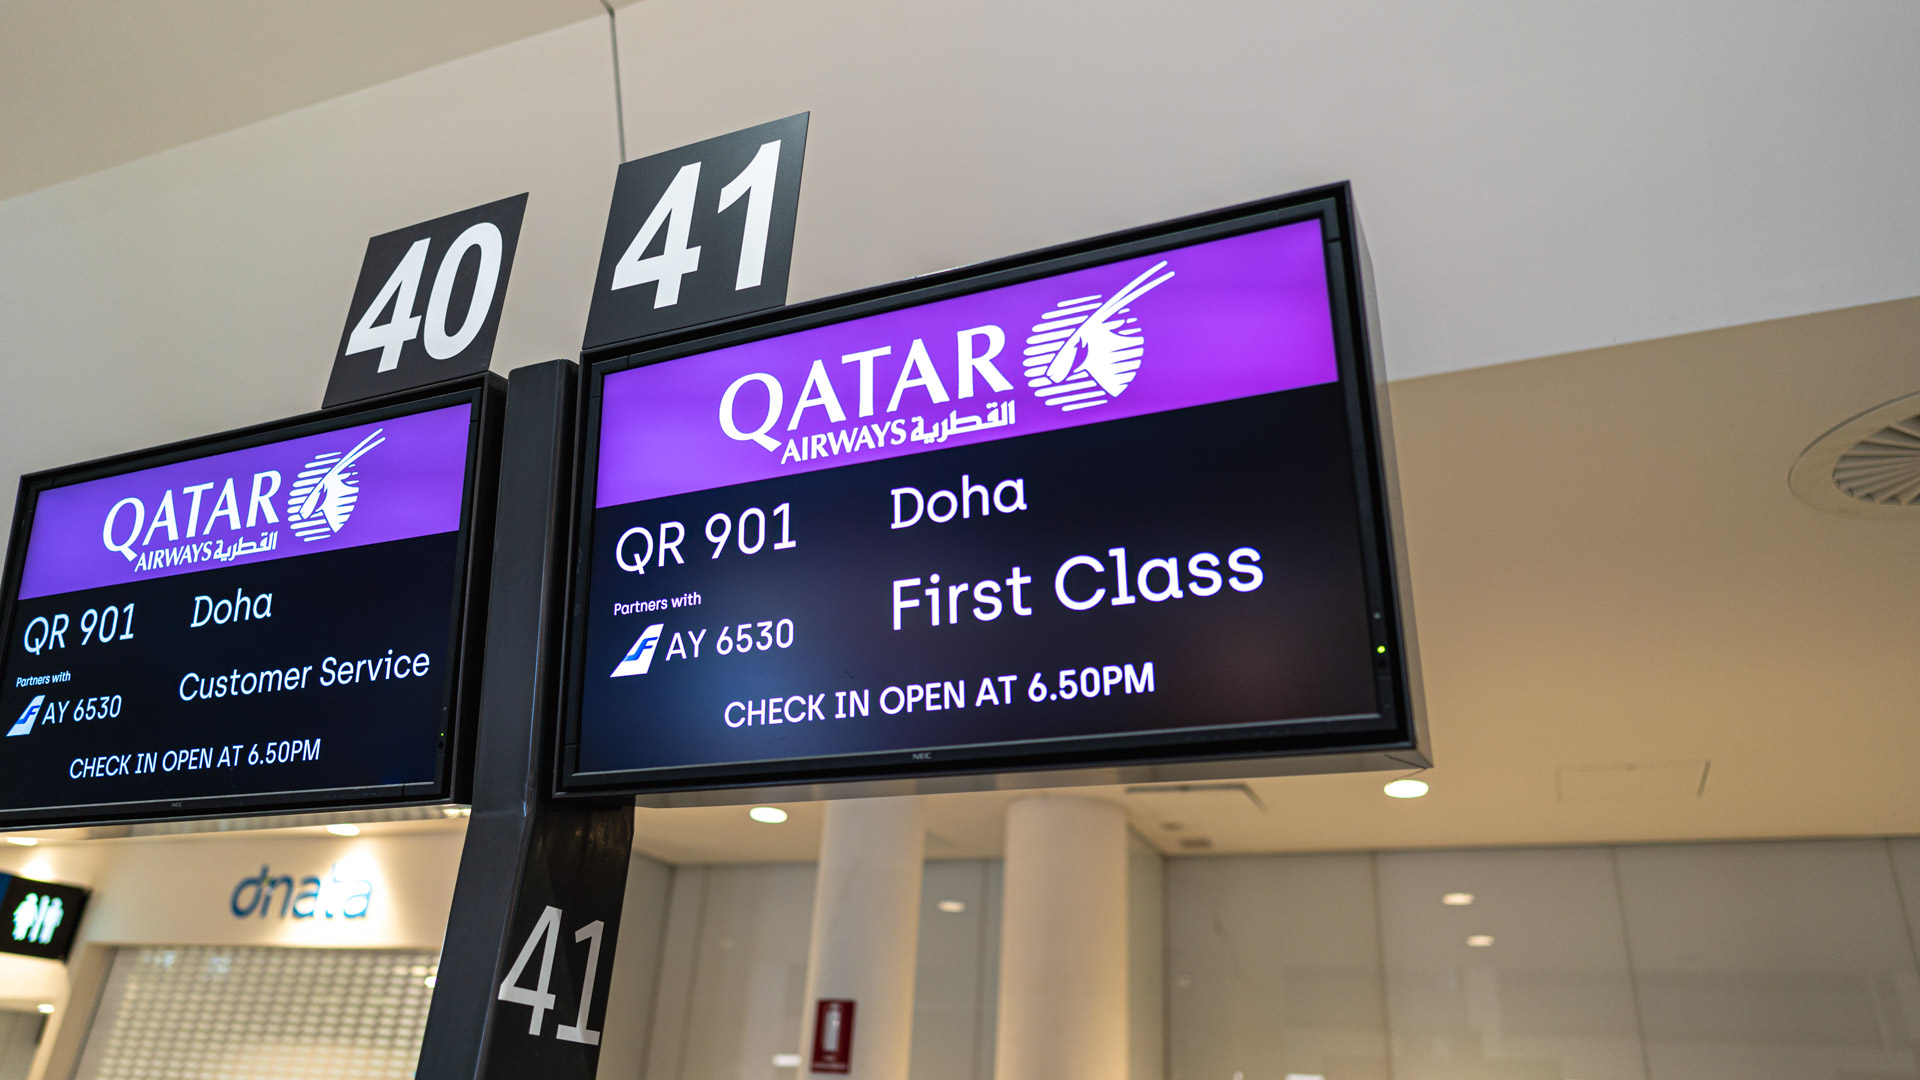 Qatar Airways Airbus A380 Economy priority check-in